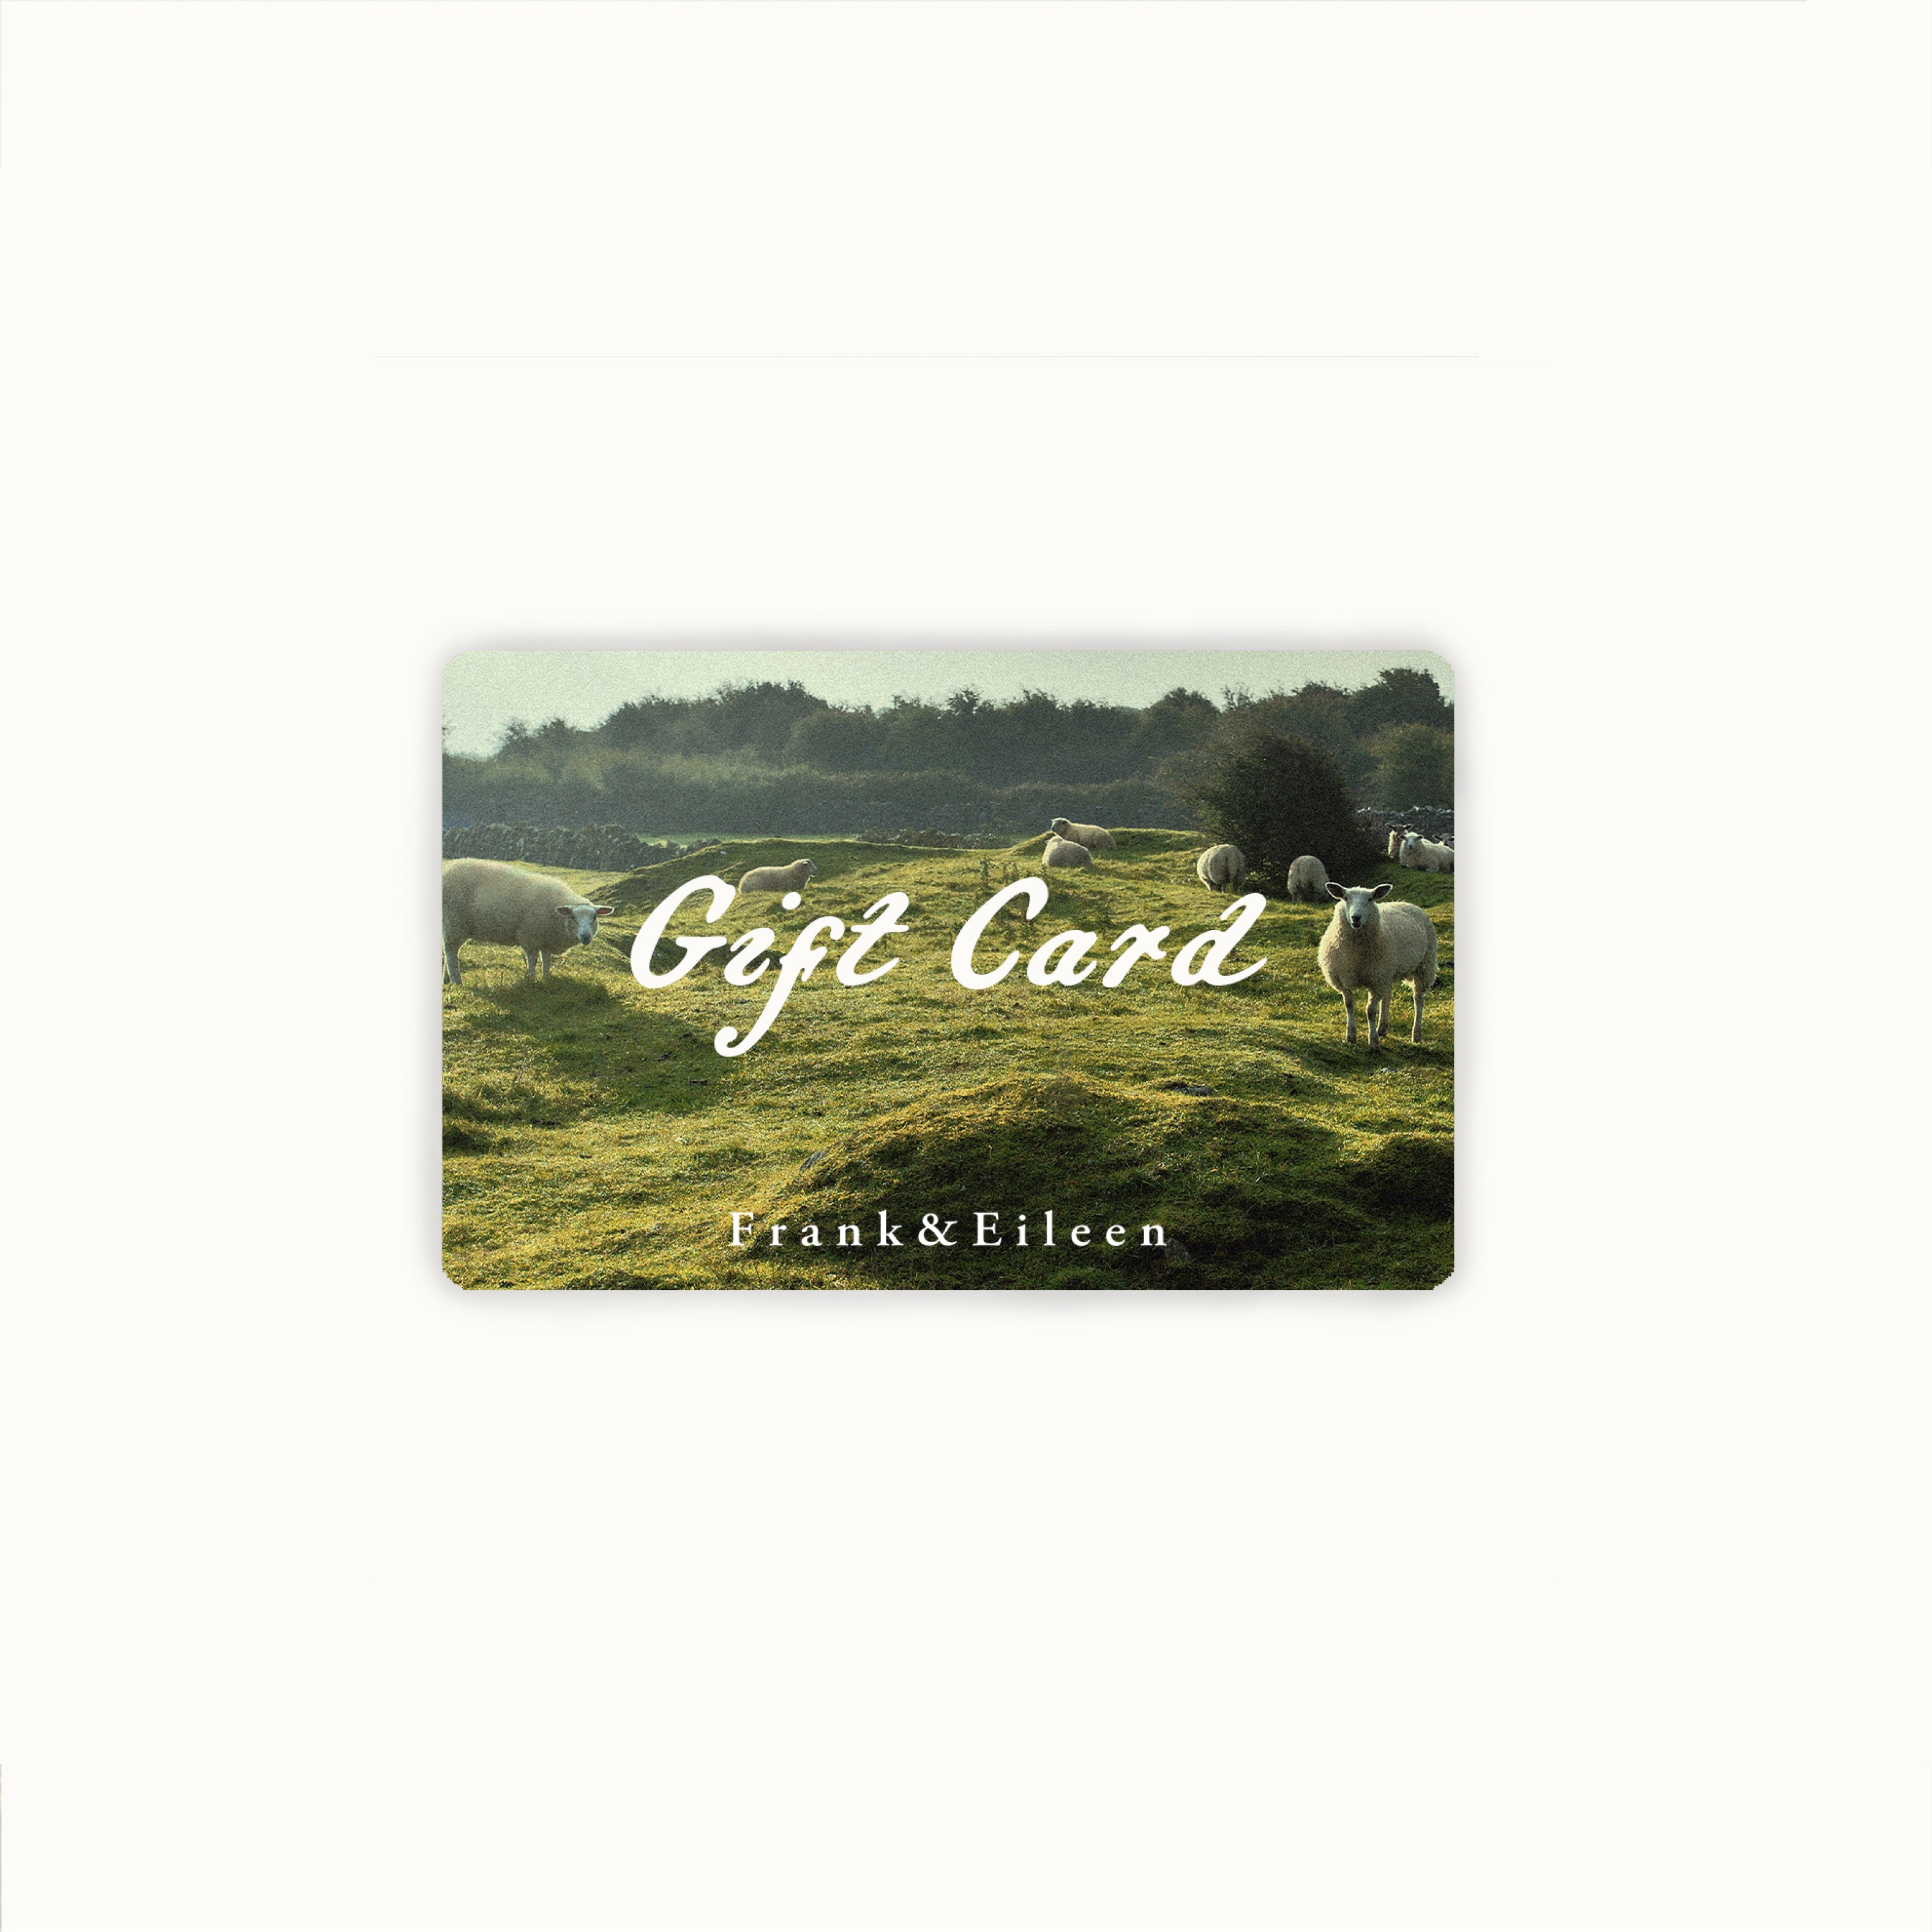 Eileen West Gift Cards